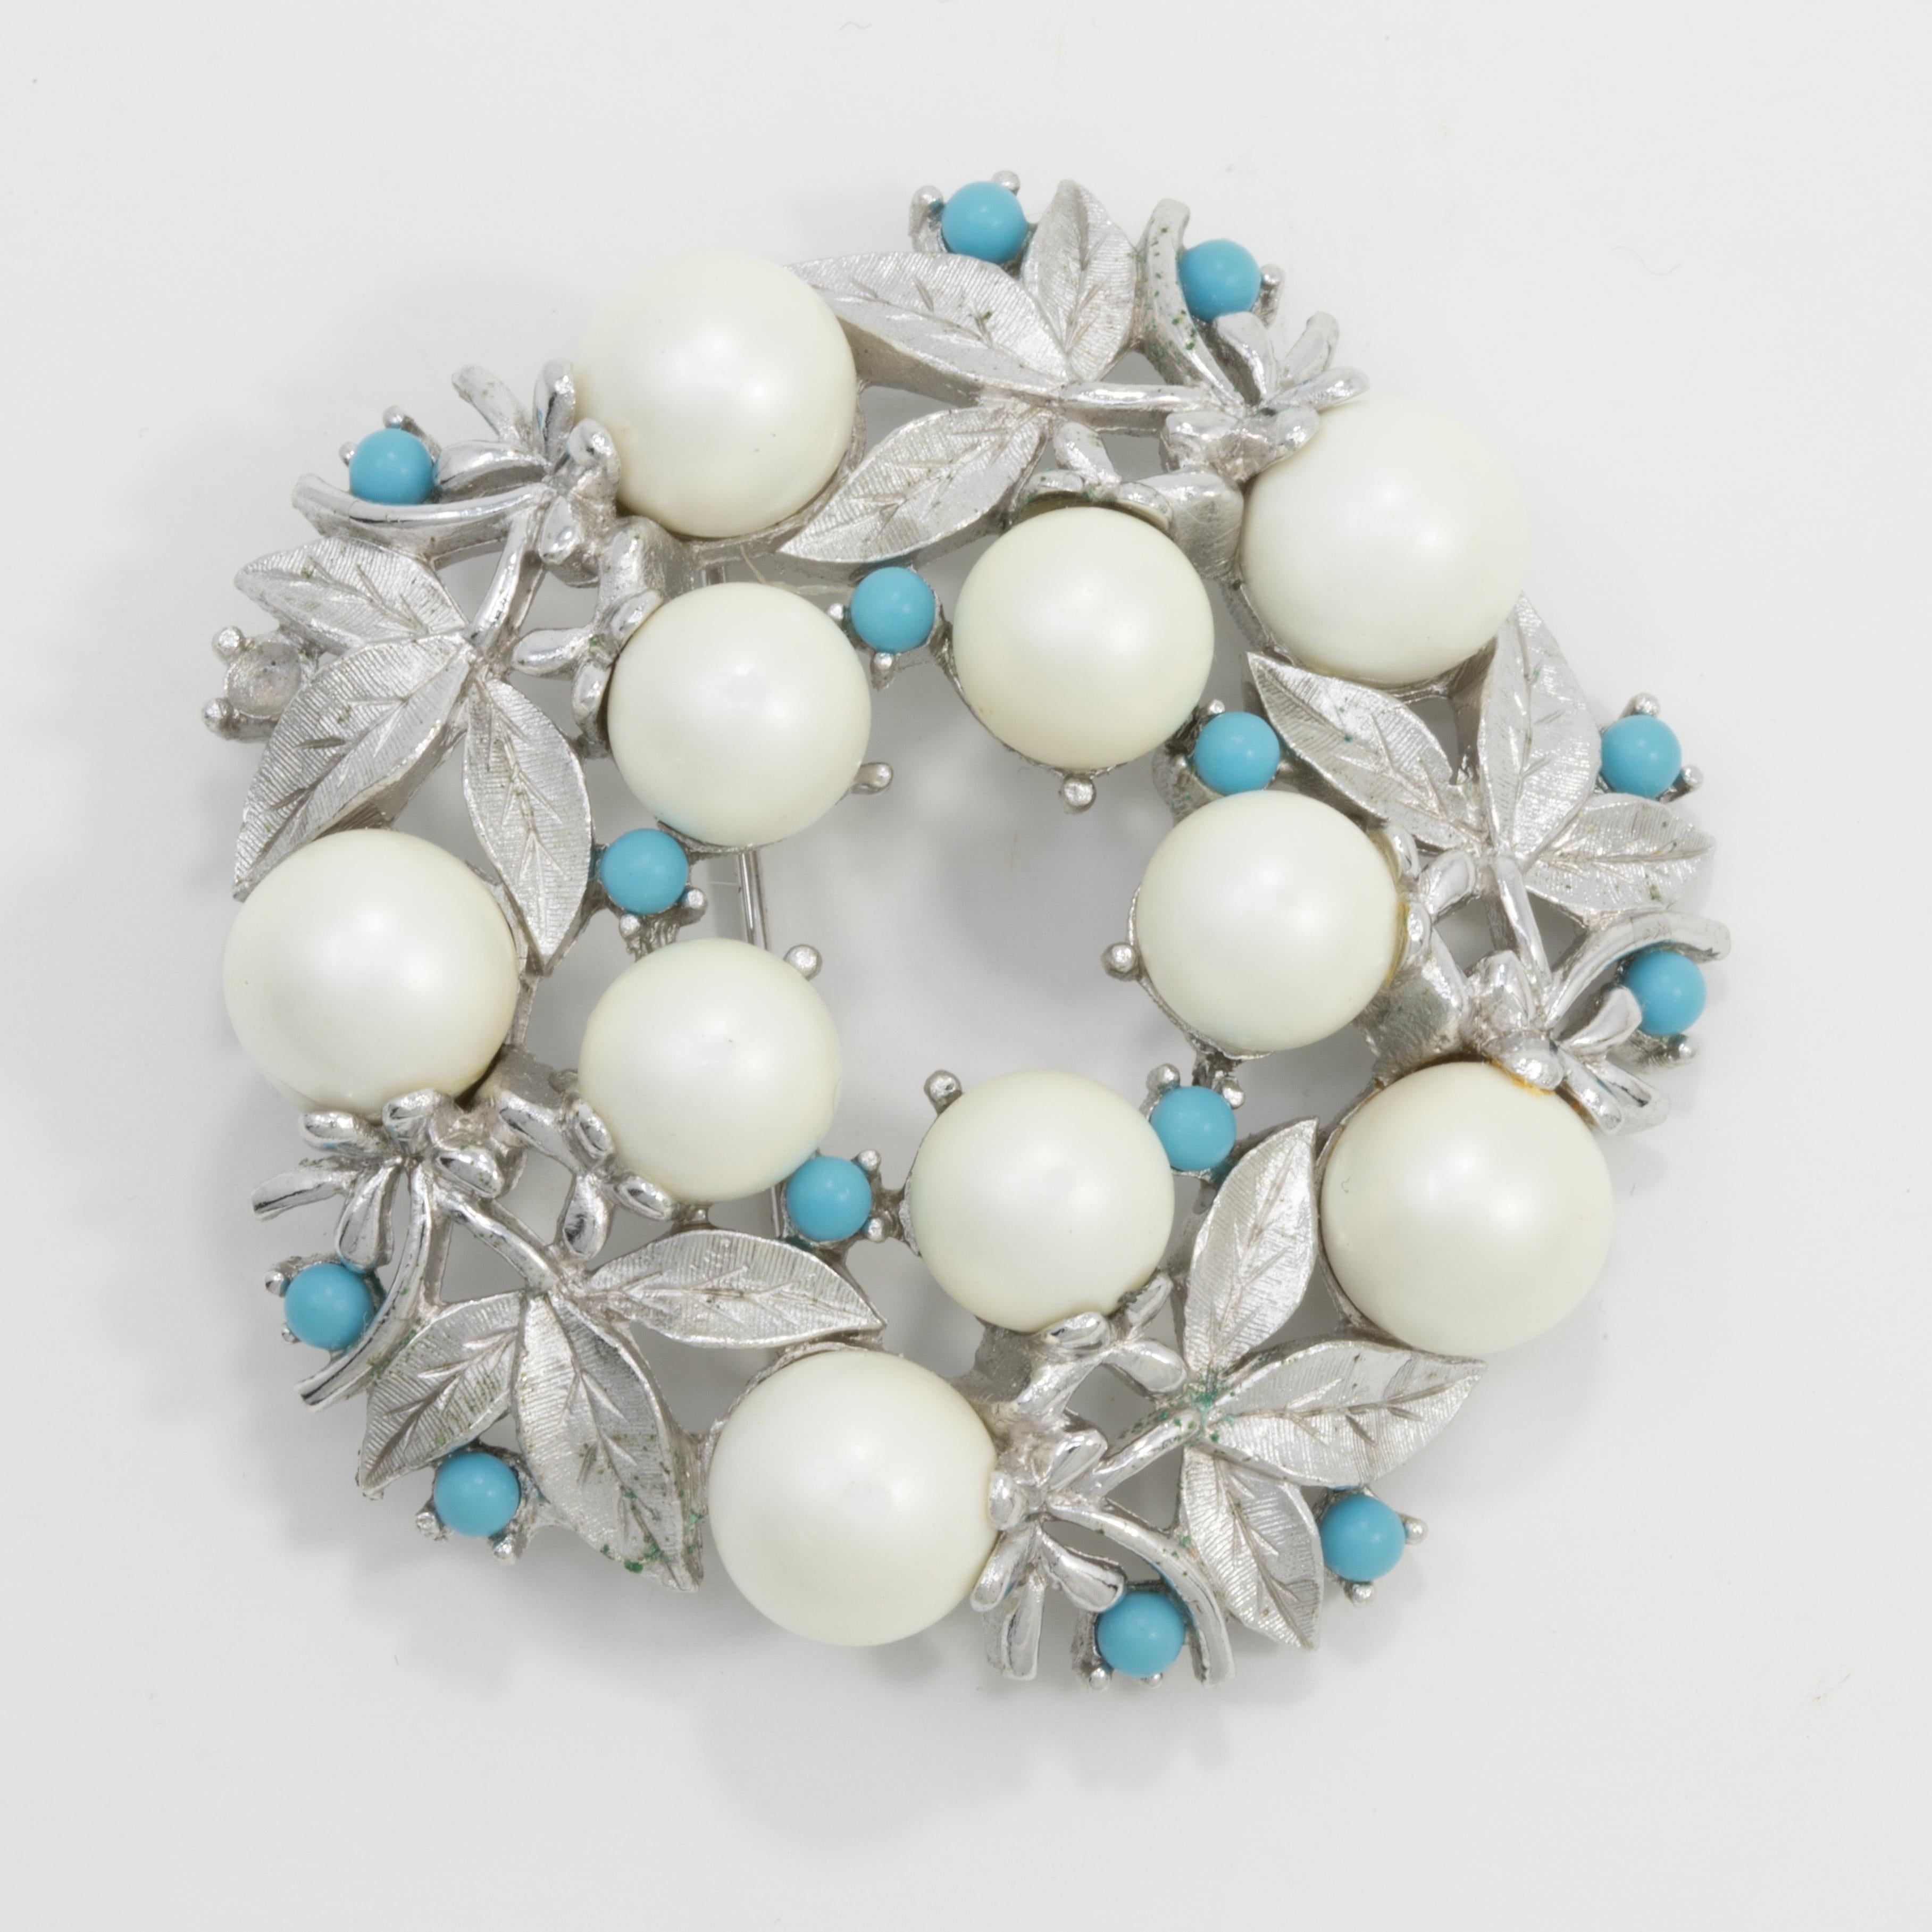 A stylish pin brooch by Sarah Coventry. Features faux pearls and turquoise-blue beads in a silver-tone floral wreath.

Marks, Hallmarks, Signatures: Sarah Cov